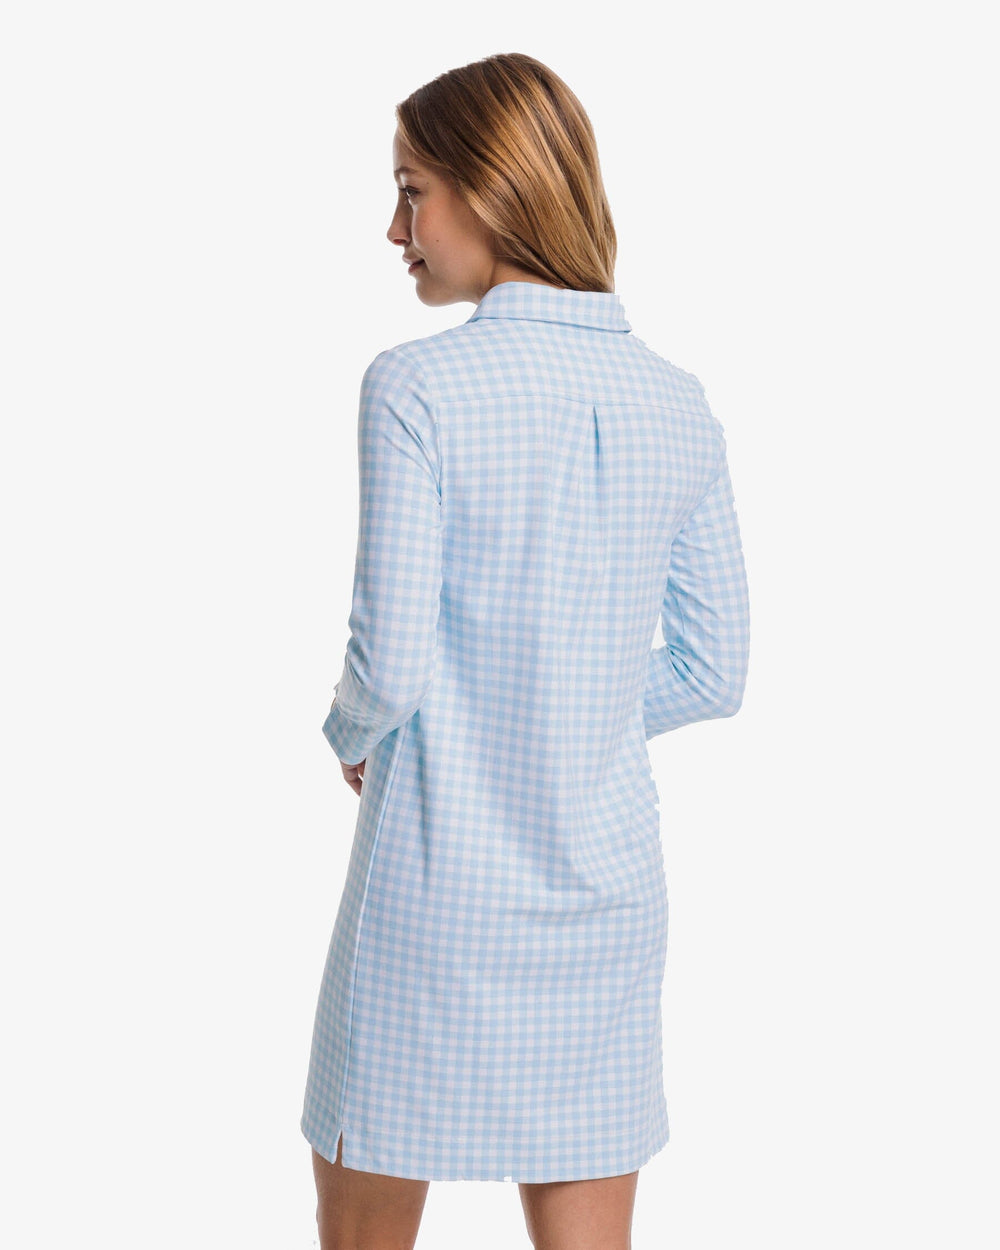 The back view of the Southern Tide Jessica Gingham Performance Dress by Southern Tide - Rain Water